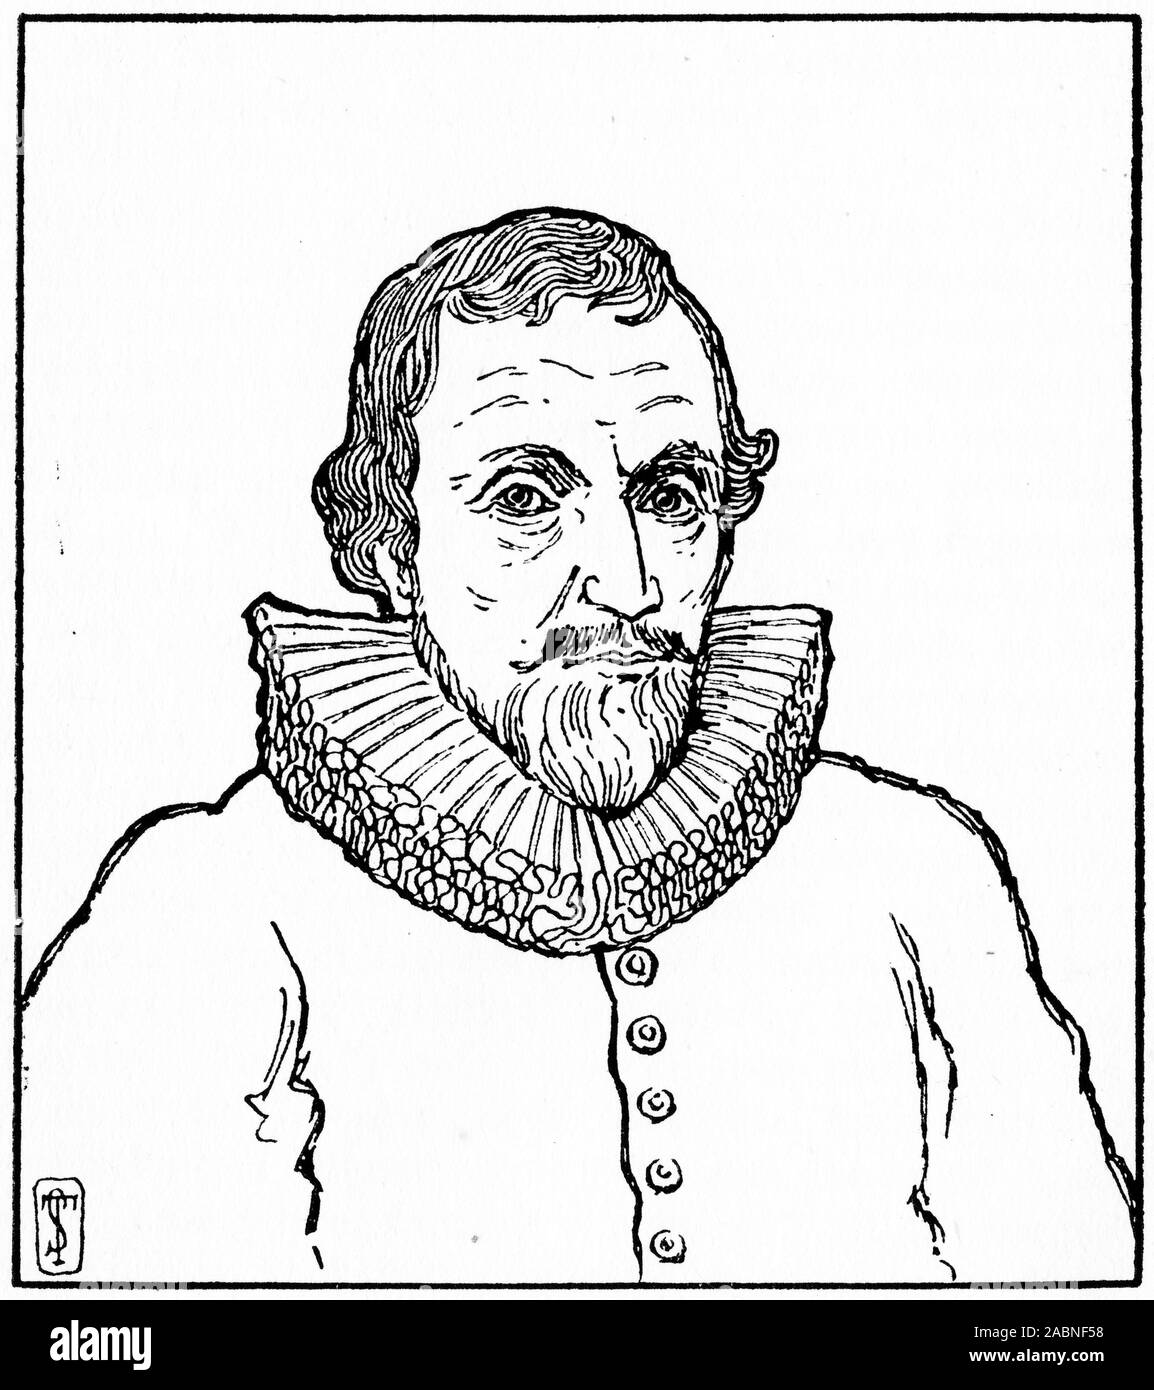 Engraved portrait of Alexander Henderson (c. 1583 – 1646)  Scottish theologian and an important ecclesiastical statesman of his period. Considered the second founder of the Reformed Church in Scotland and one of the most eminent ministers of the Church of Scotland Stock Photo